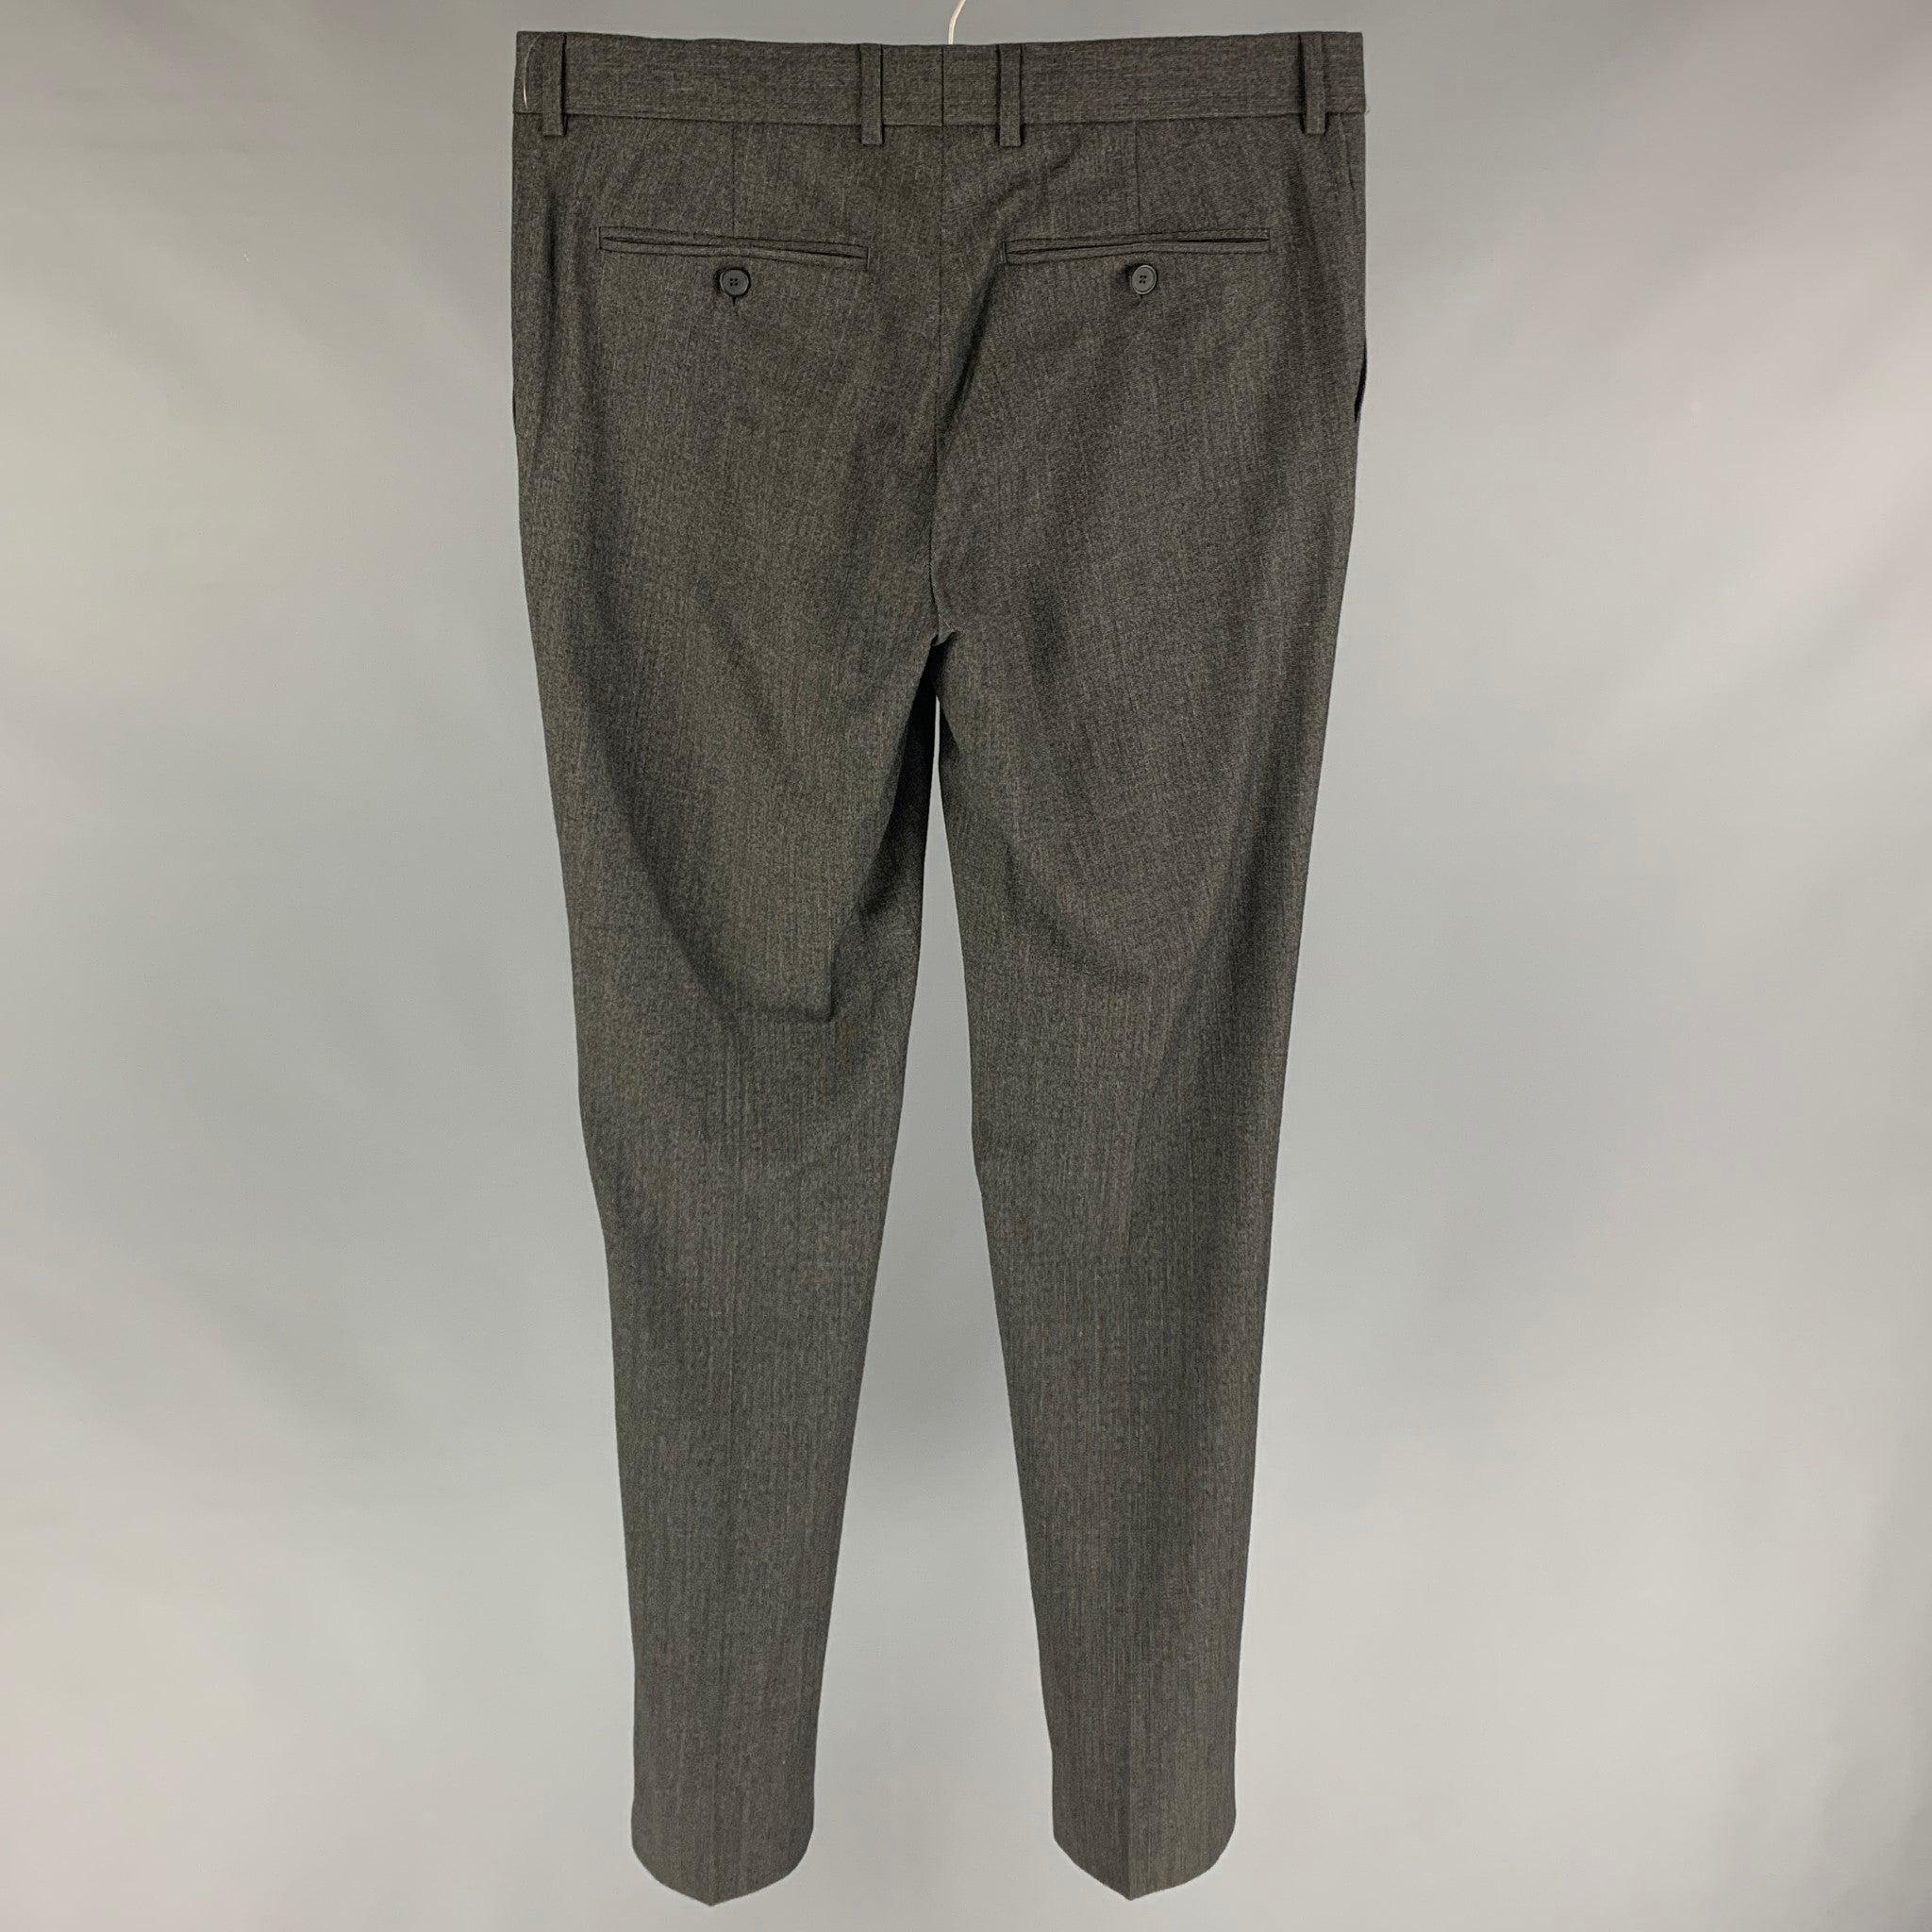 THE KOOPLES dress pants comes in a charcoal grid wool featuring a flat front, slim fit, front tag, and a zip fly closure.
New with tags.
 

Marked:   48 

Measurements: 
  Waist: 34 inches Rise: 9 inches Inseam: 34 inches Leg Opening: 14 inches 

 